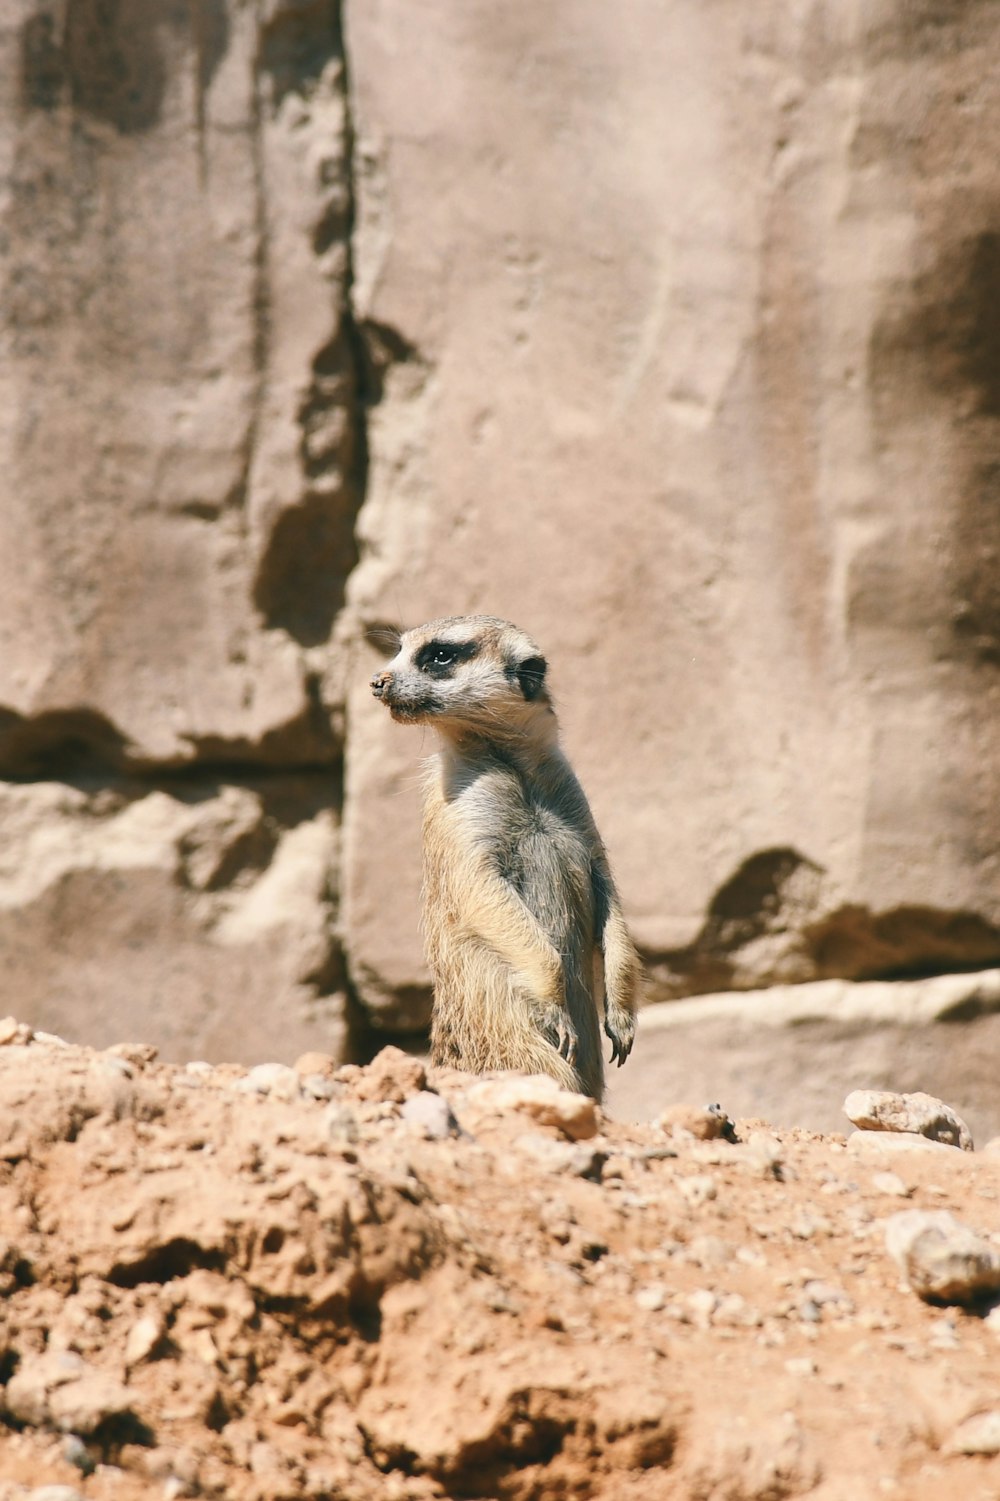 a small animal standing on a rock